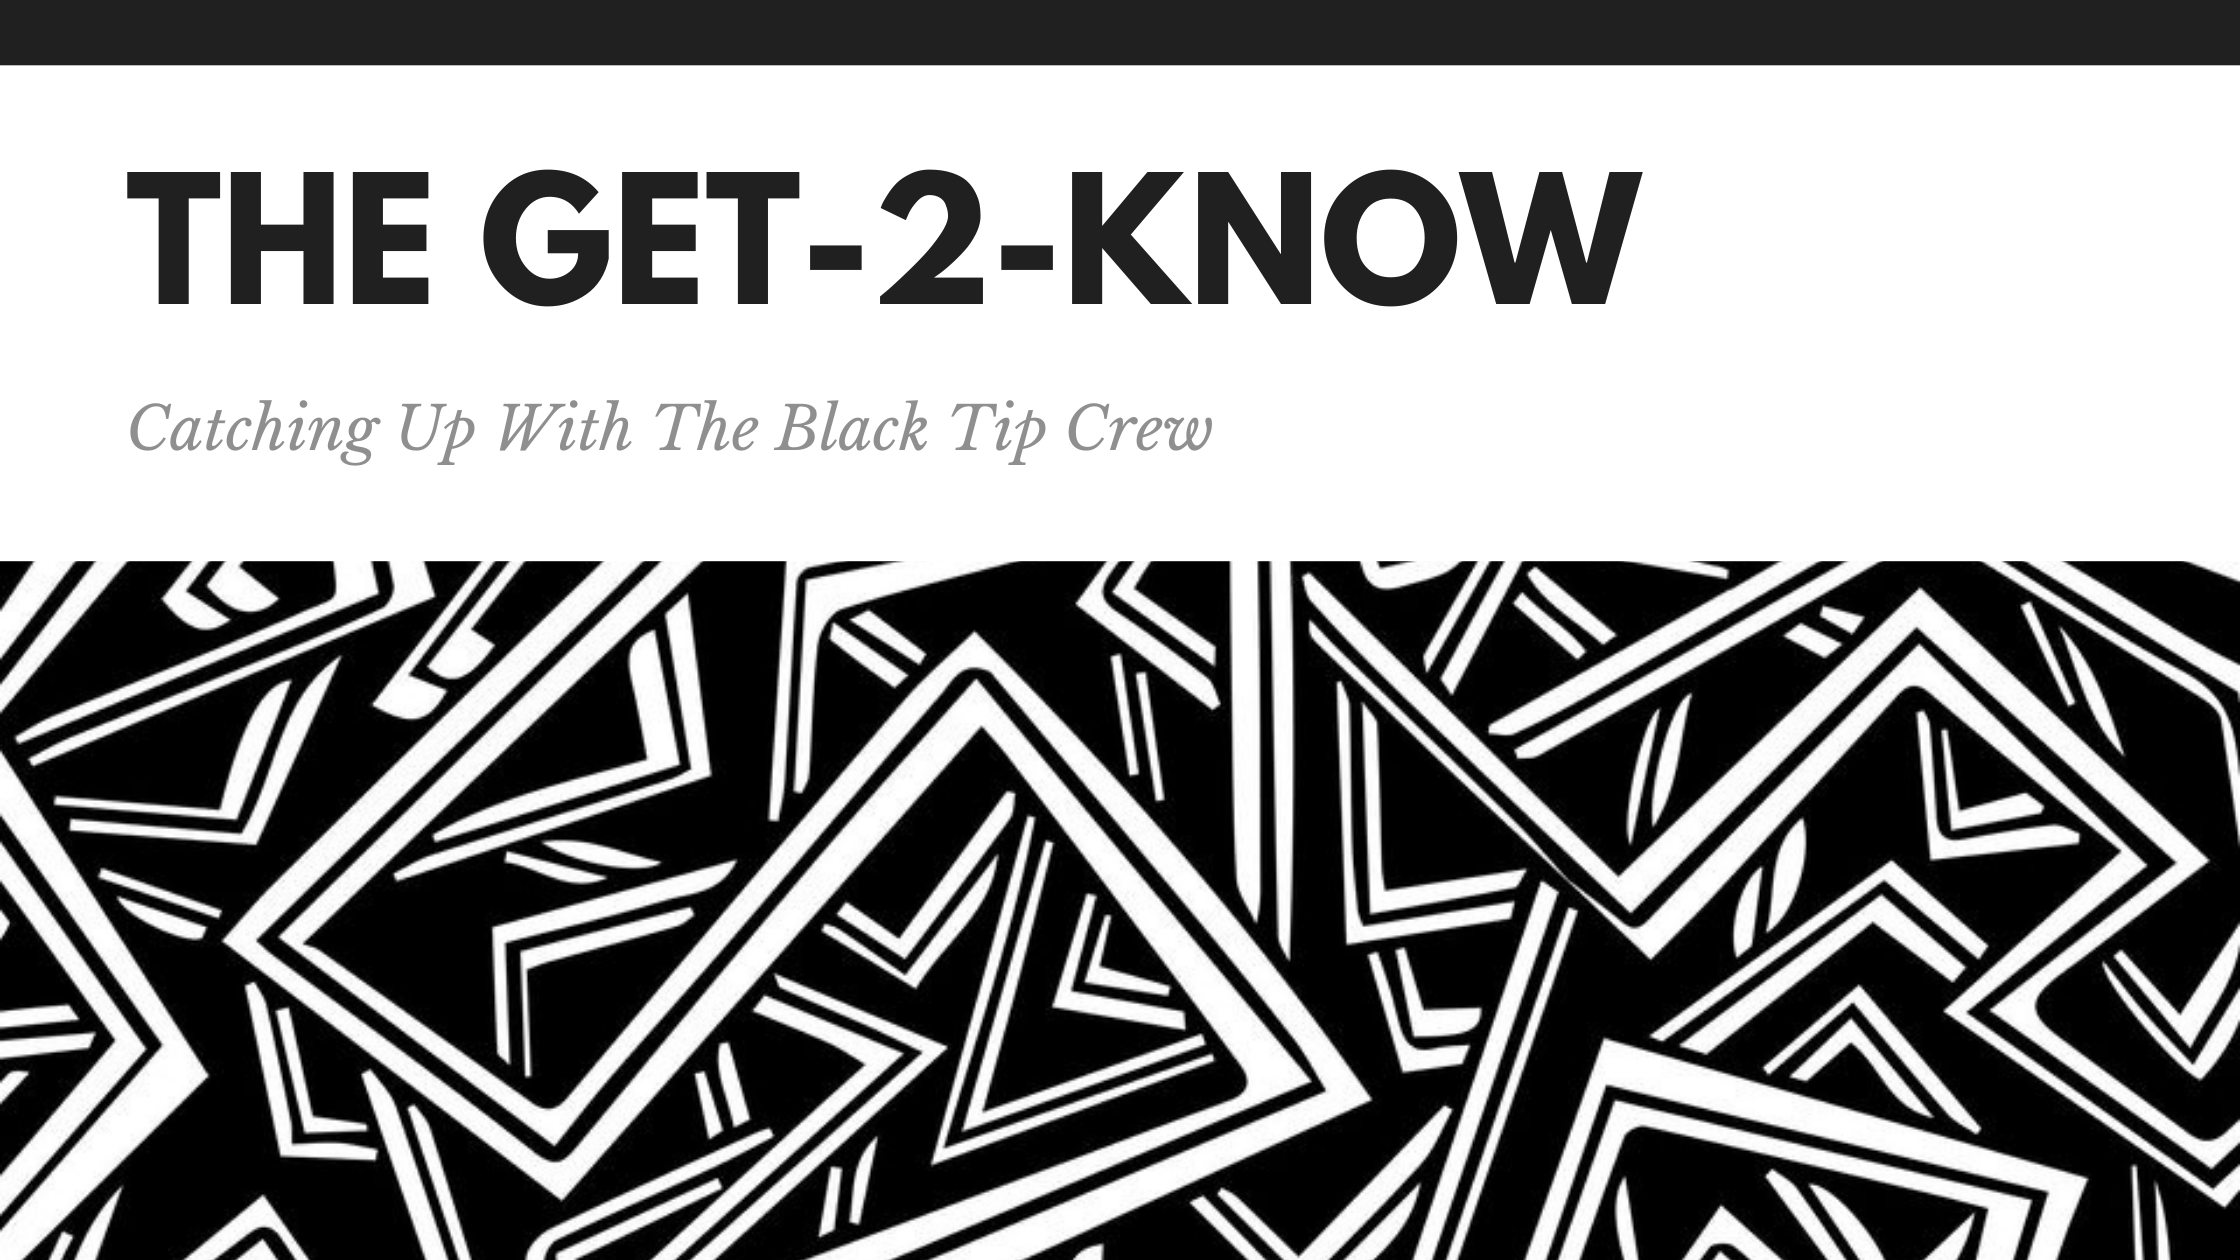 Getting 2 Know: The Black Tip Crew